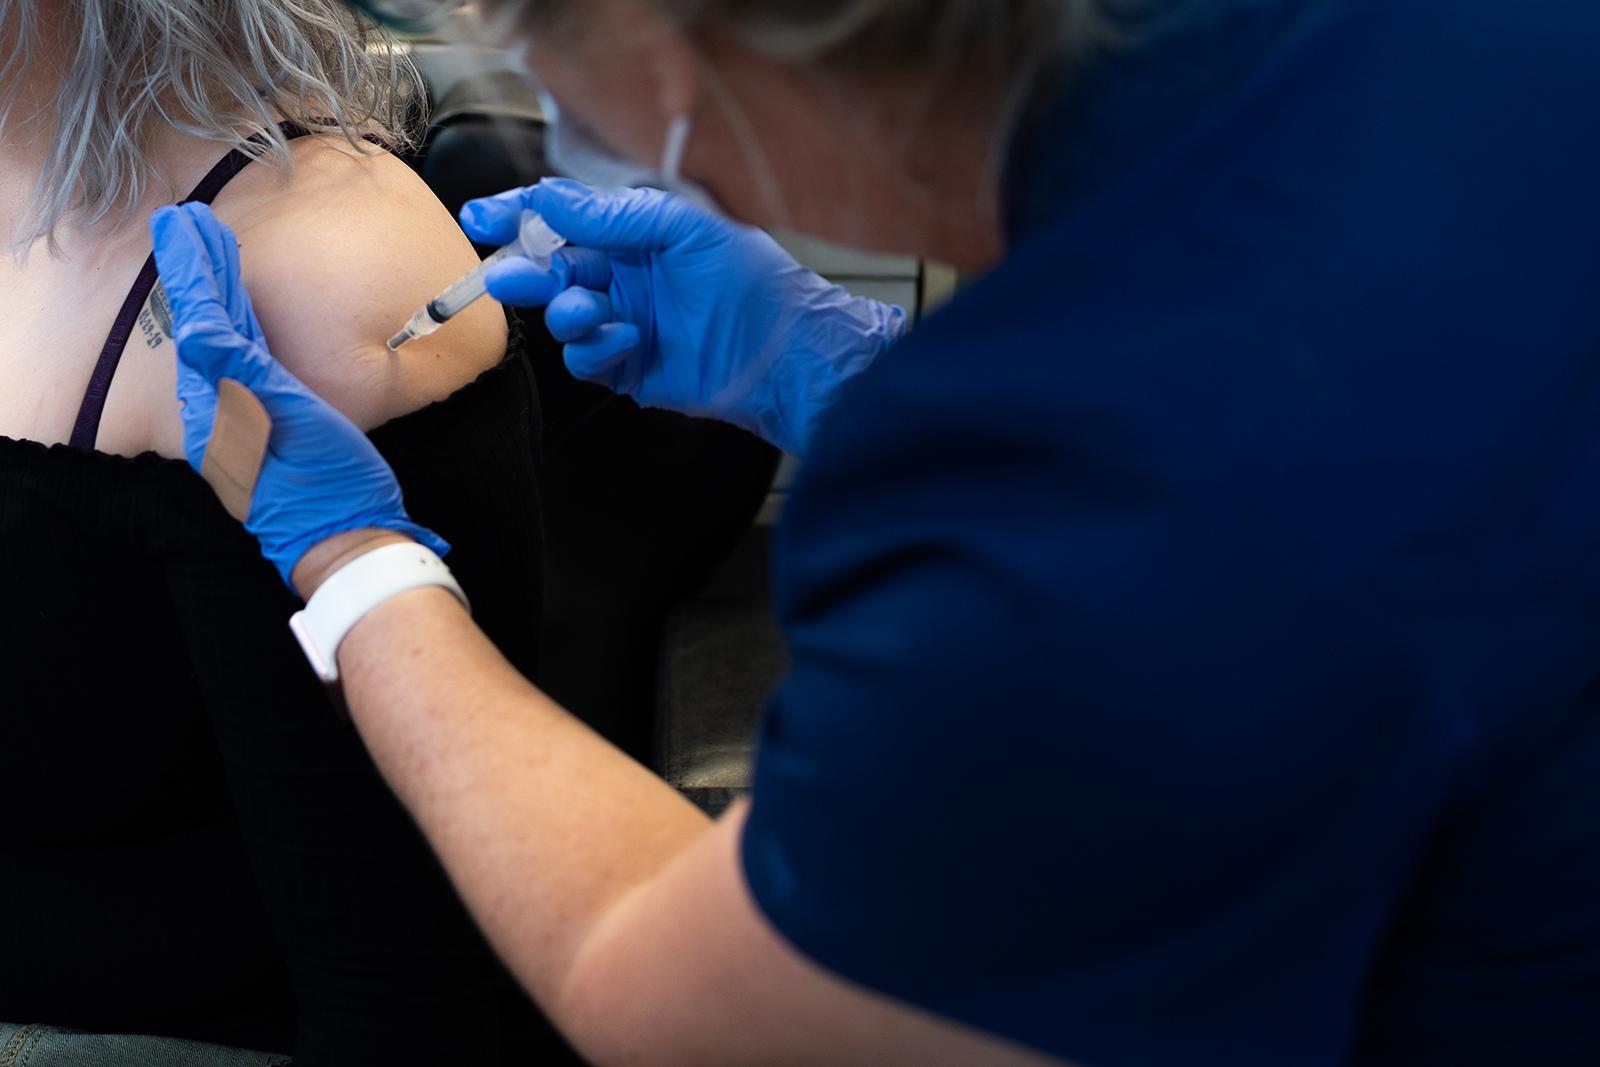 Close up of White woman getting vaccinated by a woman wearing blue gloves. Shoulder tattoo with a crown and a date is visible.